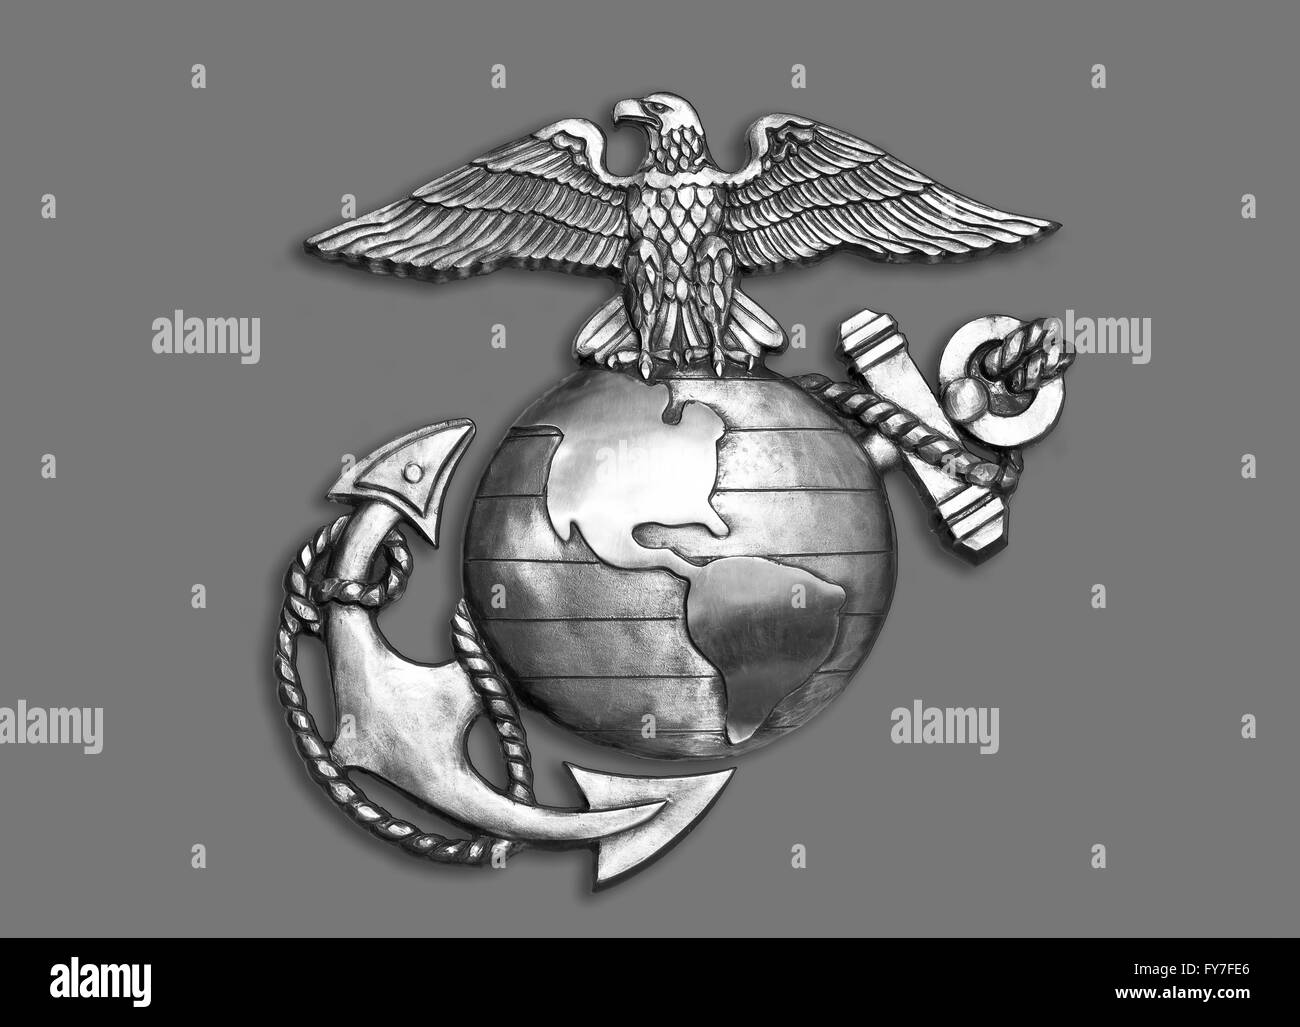 Marine eagle,globe and anchor brass emblem in black and white. Stock Photo